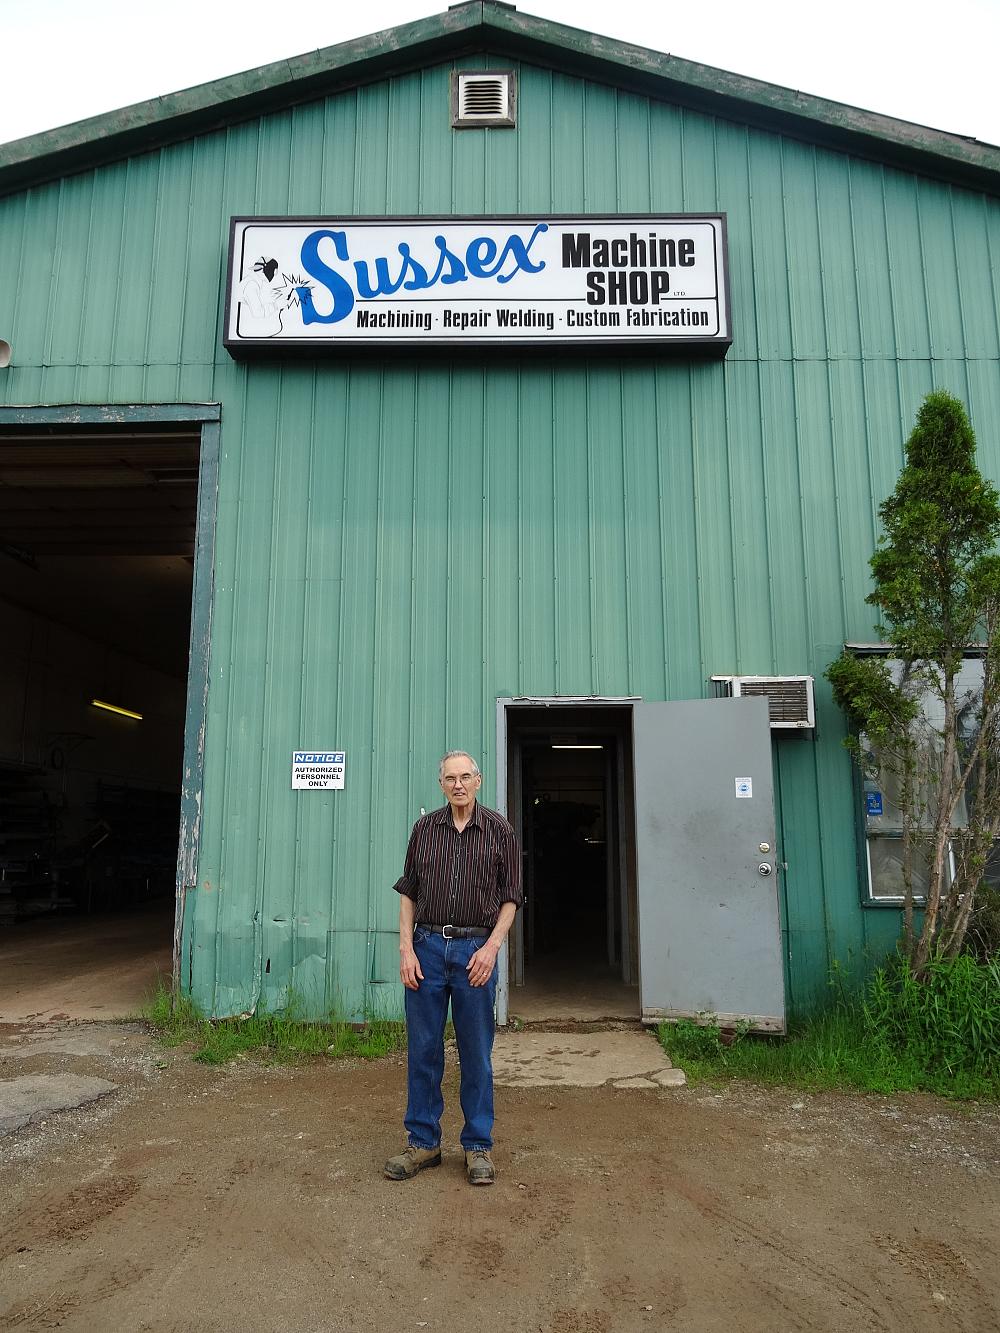 Don Nancekivell, the owner of Sussex Machine Shop, stands in front of the shop he founded in 1978.